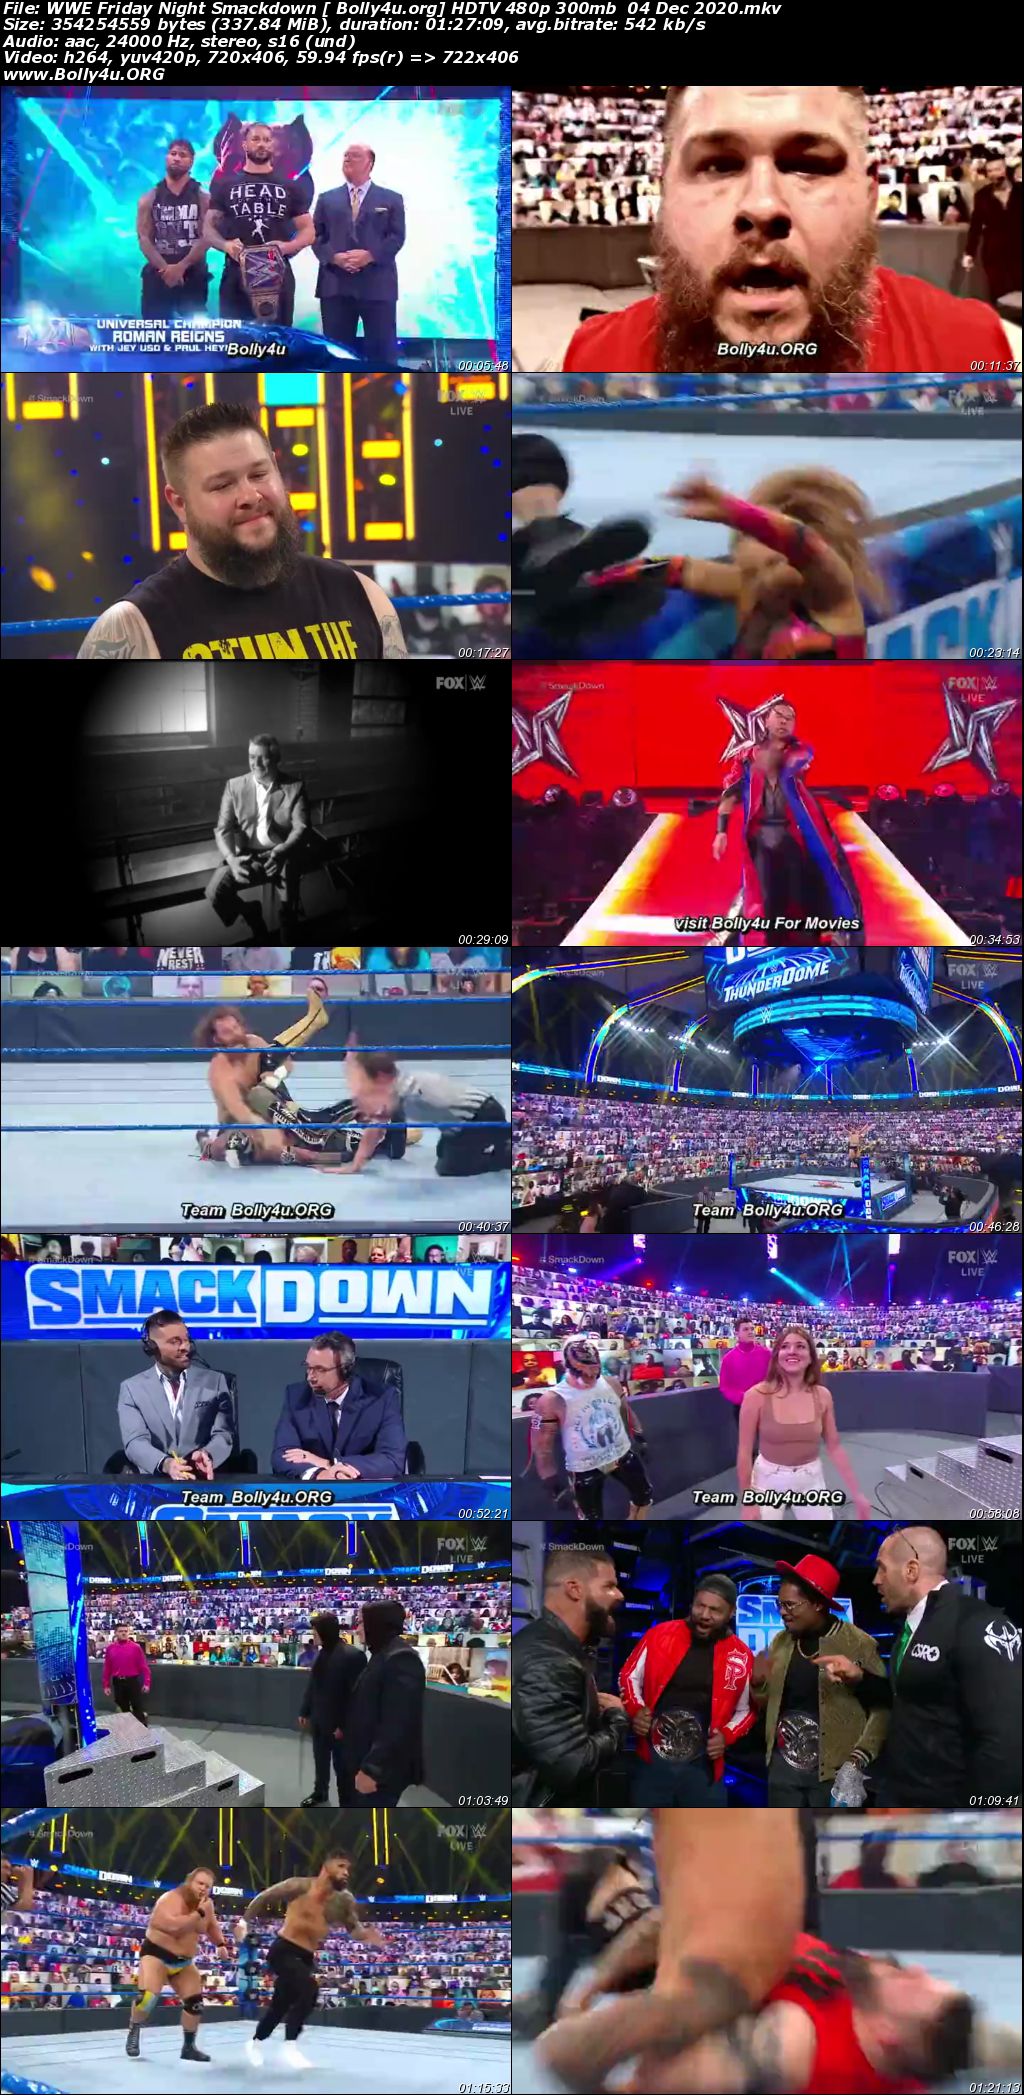 WWE Friday Night Smackdown HDTV 480p 300mb 04 Dec 2020 Download